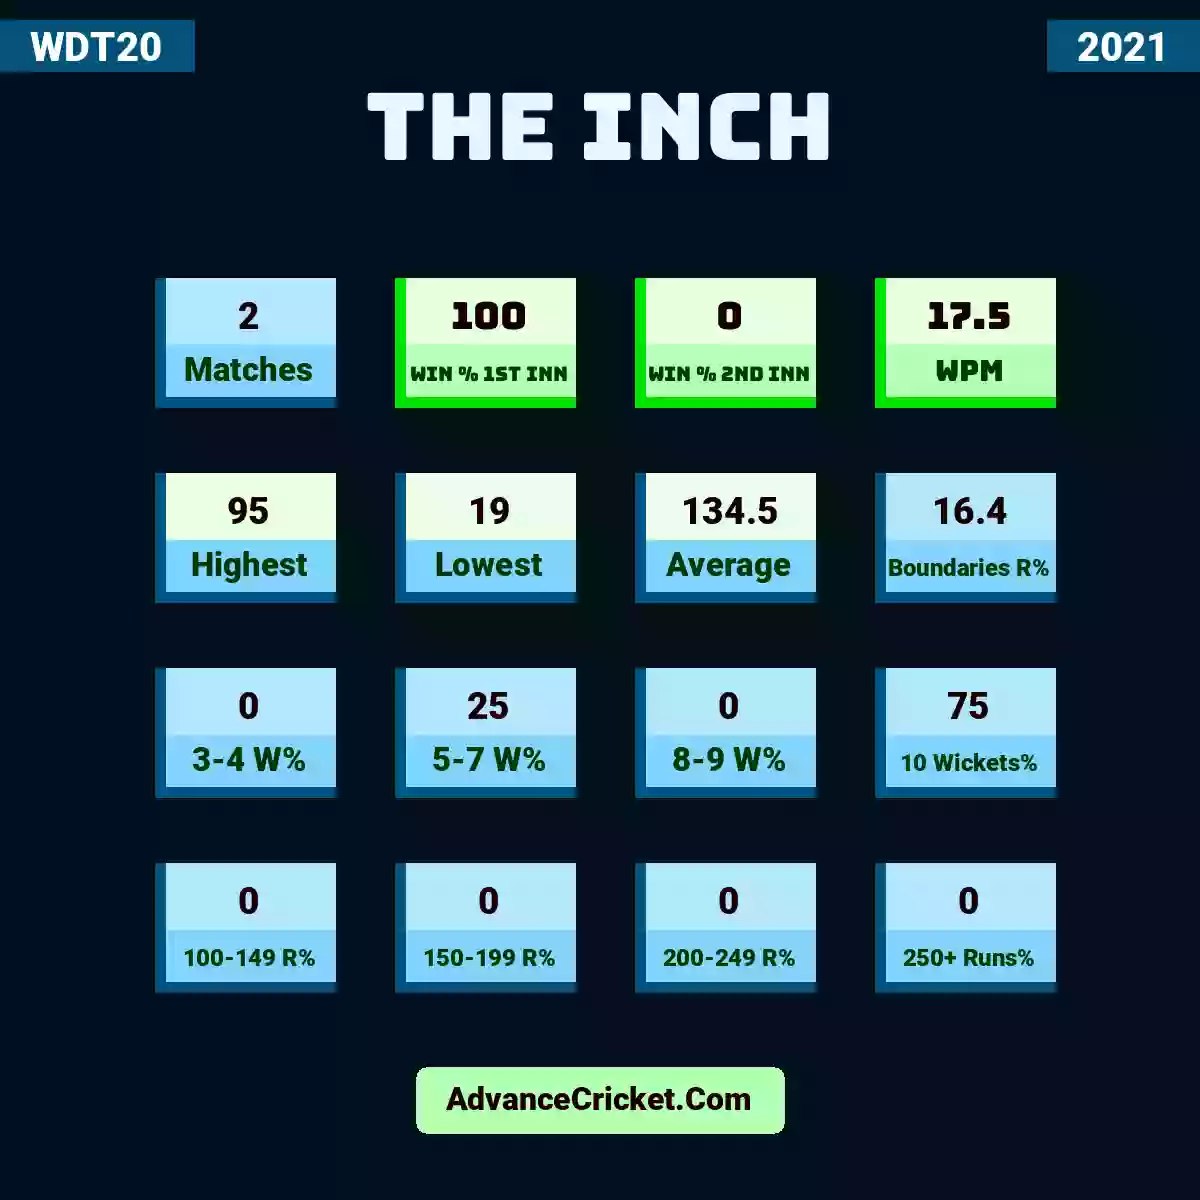 Image showing The Inch with Matches: 2, Win % 1st Inn: 100, Win % 2nd Inn: 0, WPM: 17.5, Highest: 95, Lowest: 19, Average: 134.5, Boundaries R%: 16.4, 3-4 W%: 0, 5-7 W%: 25, 8-9 W%: 0, 10 Wickets%: 75, 100-149 R%: 0, 150-199 R%: 0, 200-249 R%: 0, 250+ Runs%: 0.